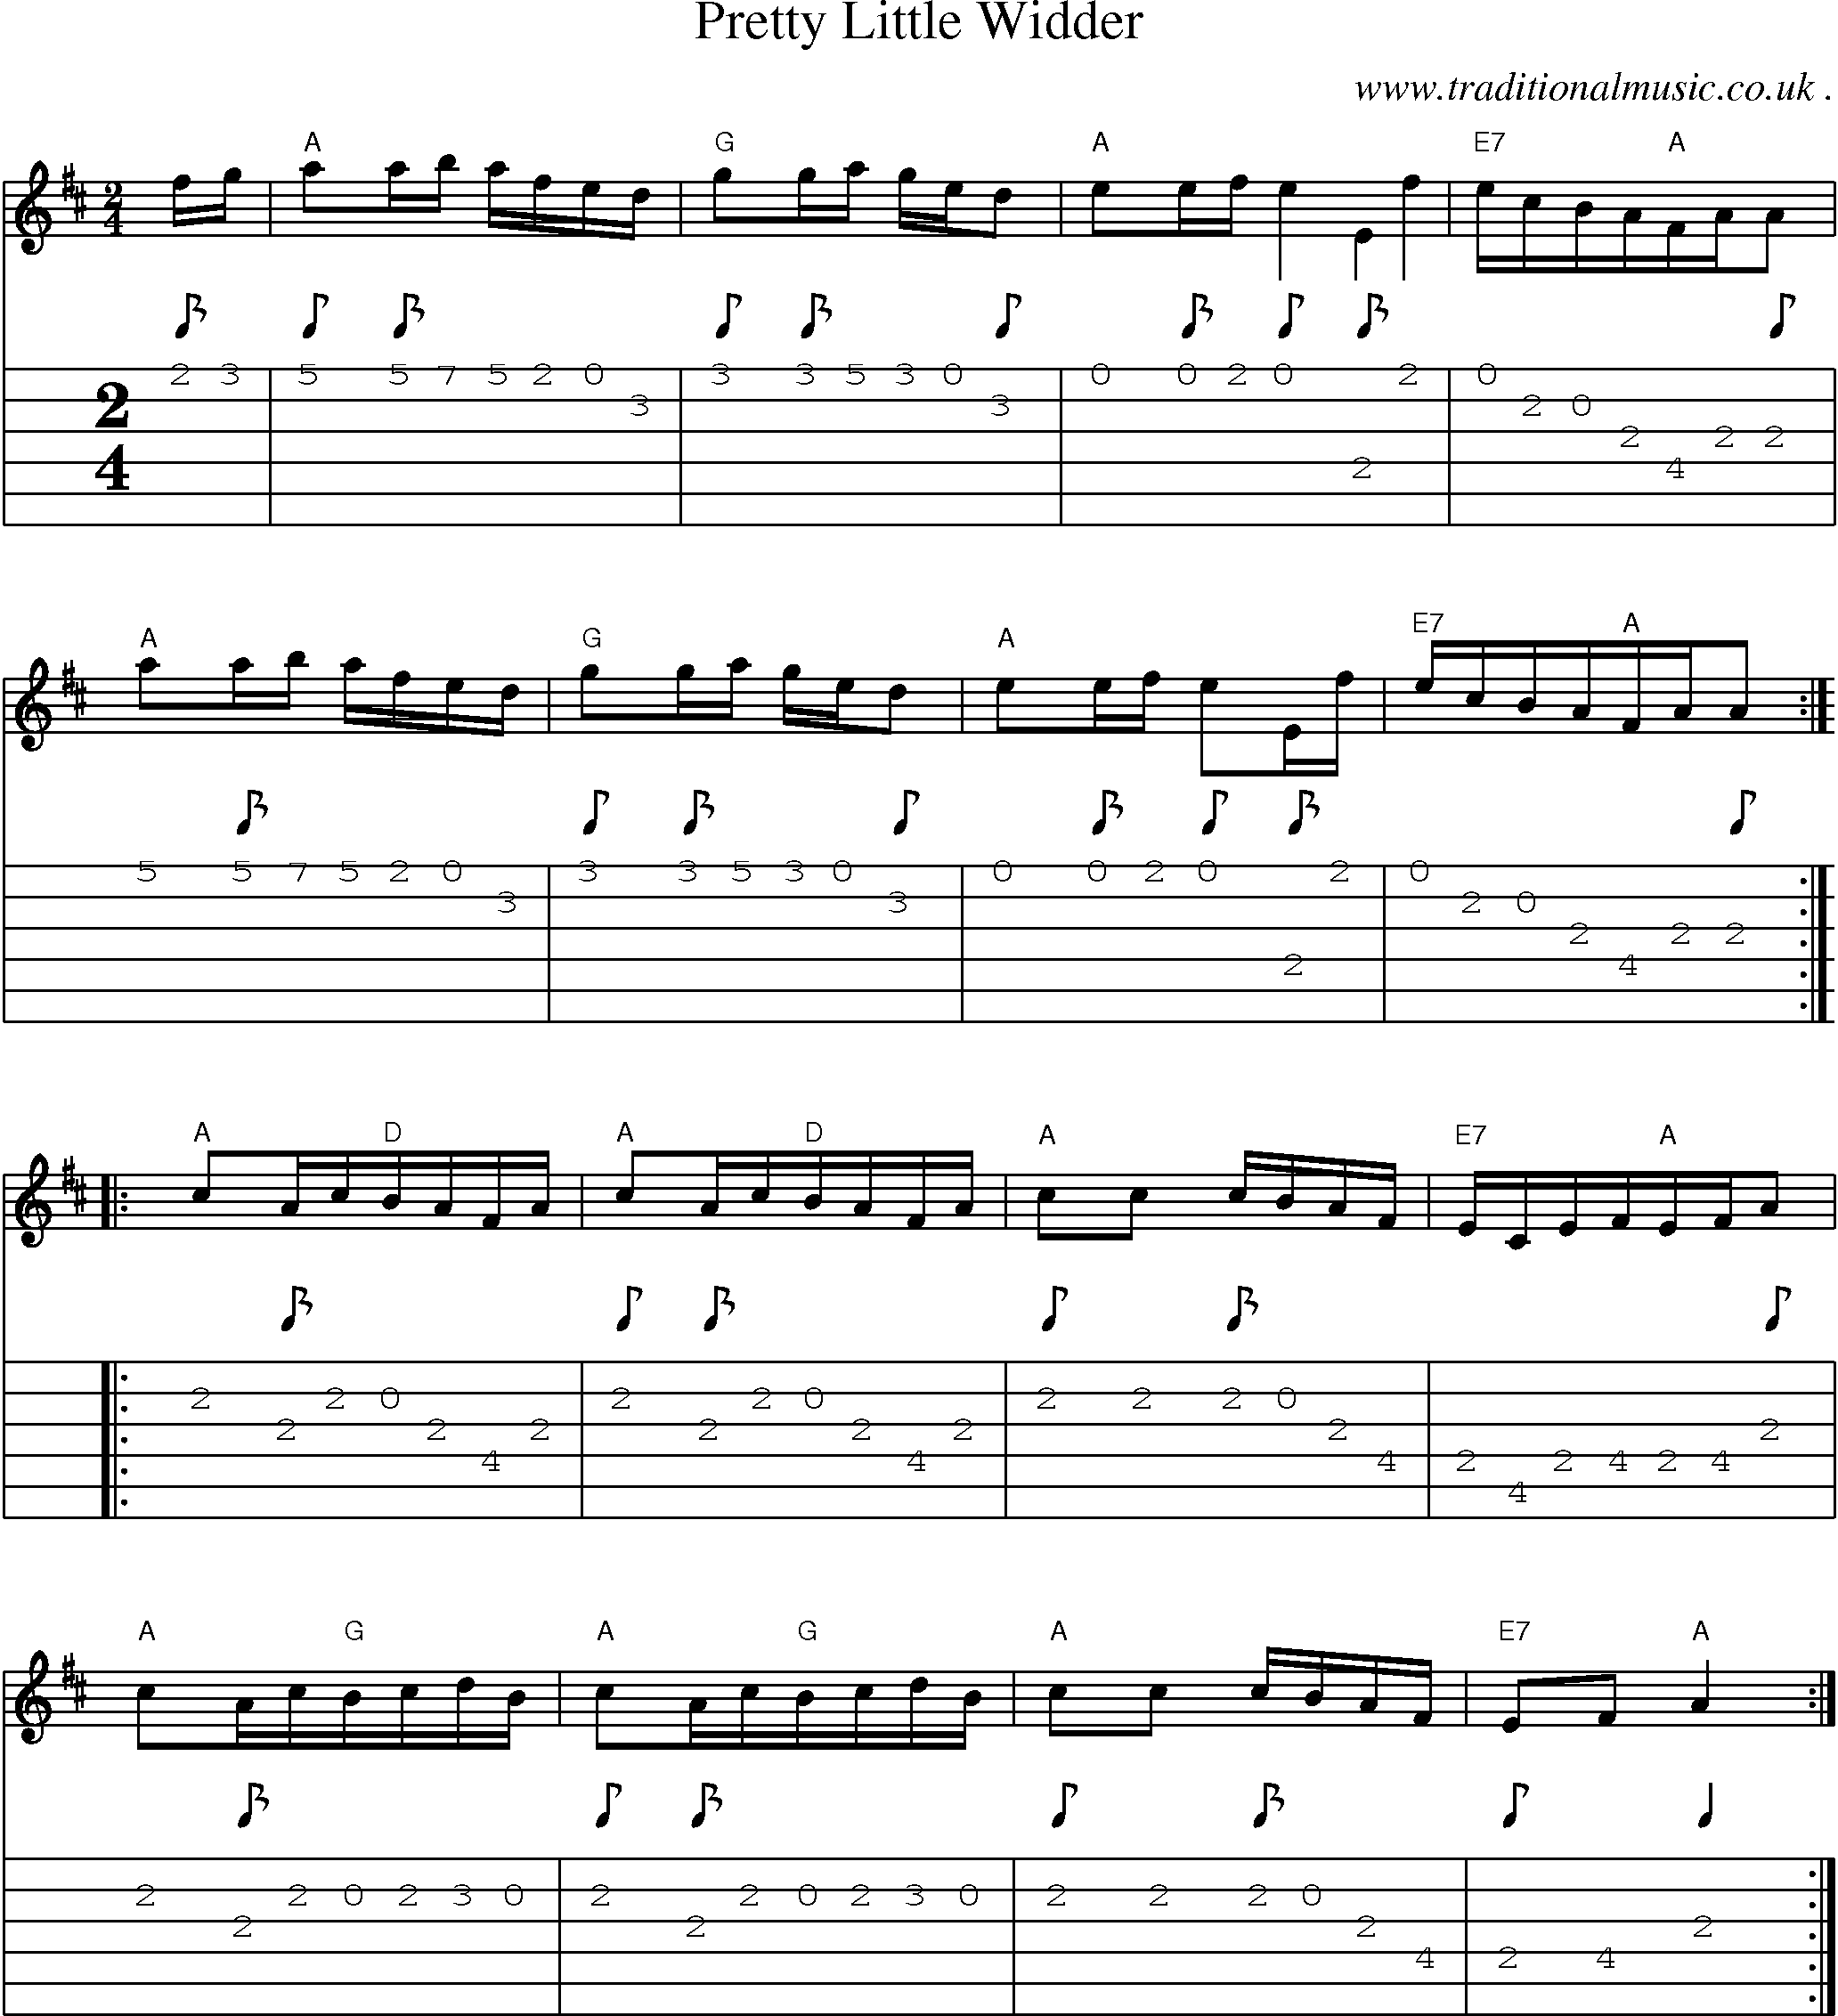 Sheet-Music and Guitar Tabs for Pretty Little Widder